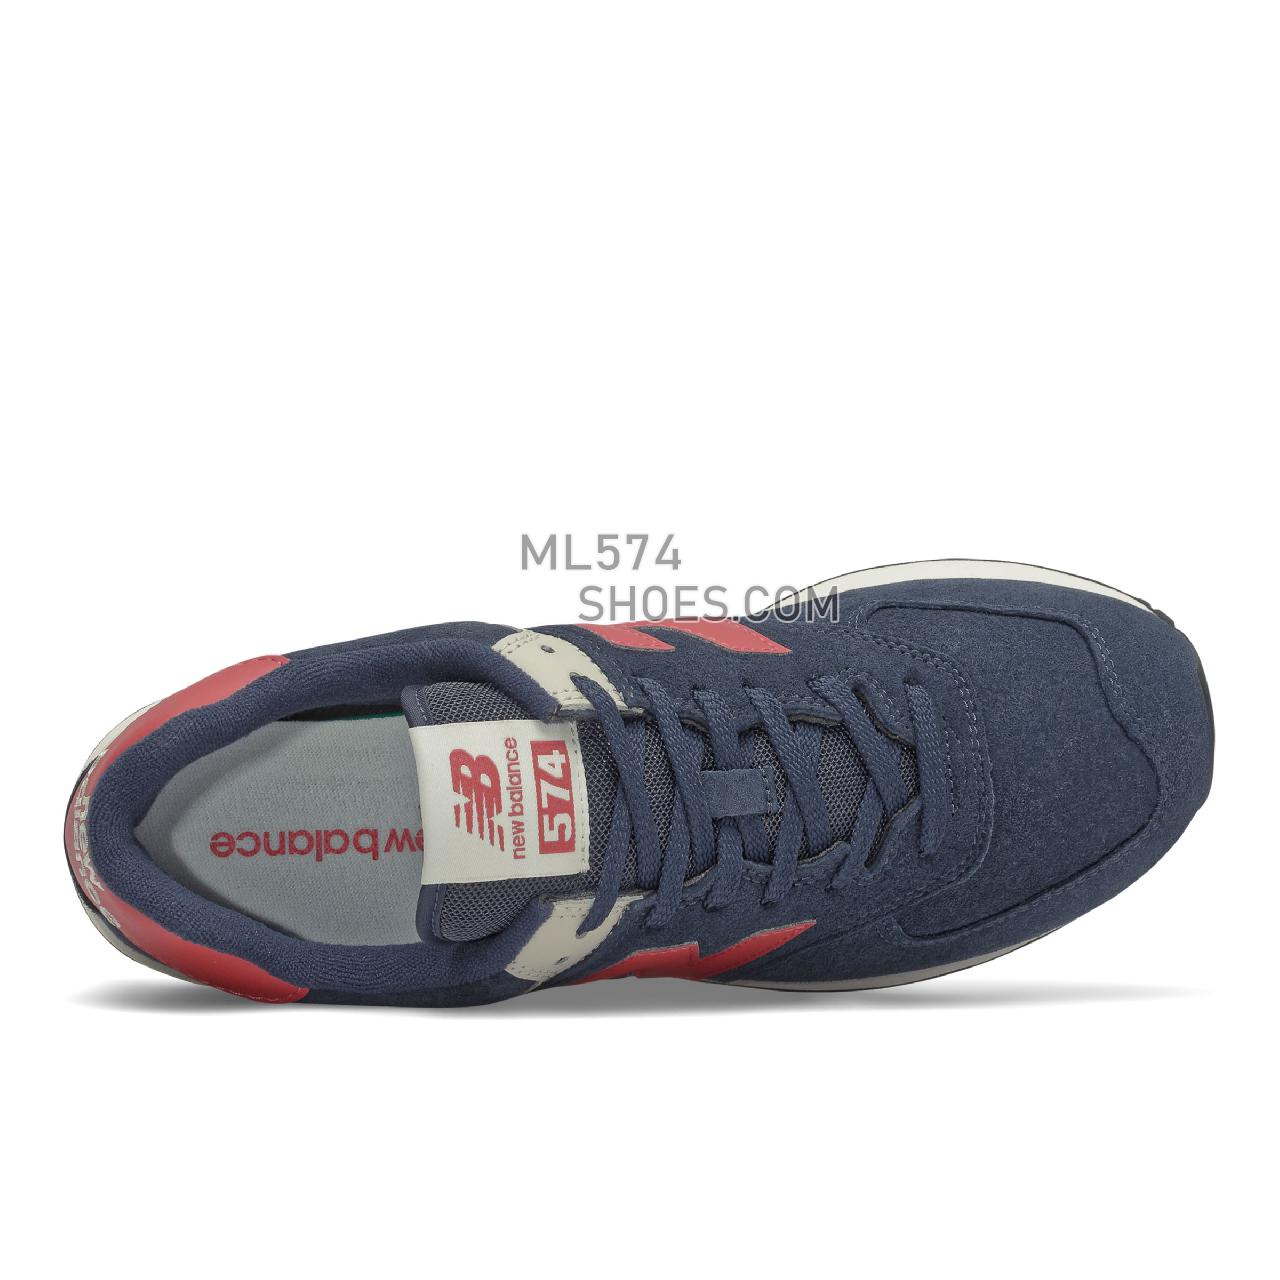 New Balance 574v2 - Men's Sport Style Sneakers - Navy with Red - ML574PN2